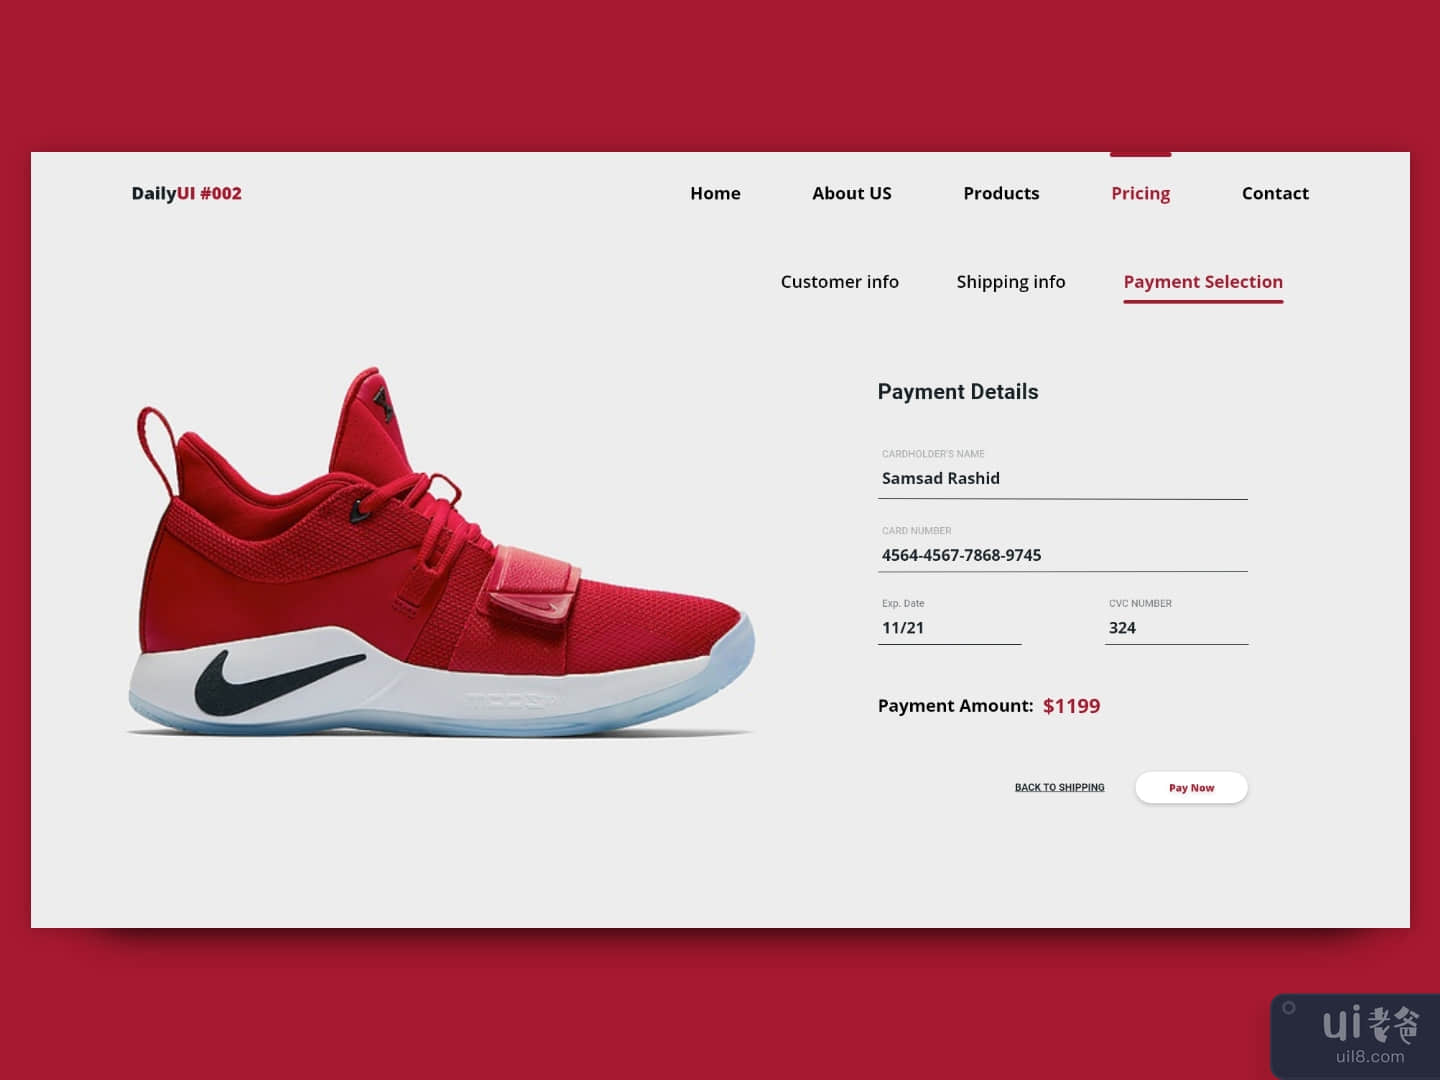 DailyUI #002: Credit Card Checkout Page